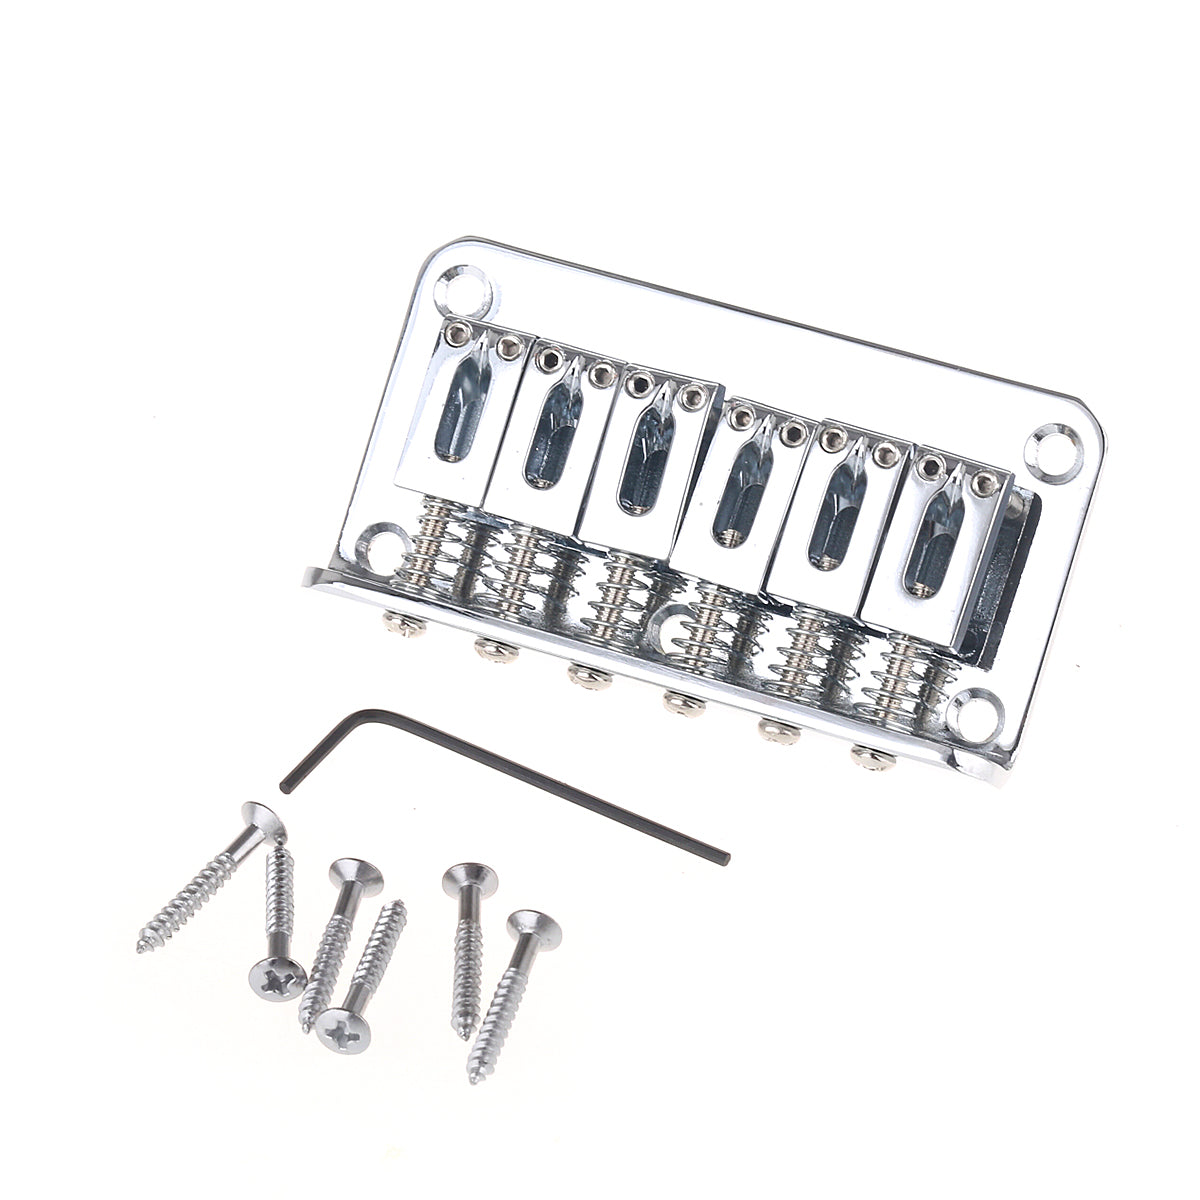 Musiclily 78mm 6 String Fixed Guitar Hardtail Bridge,Chrome